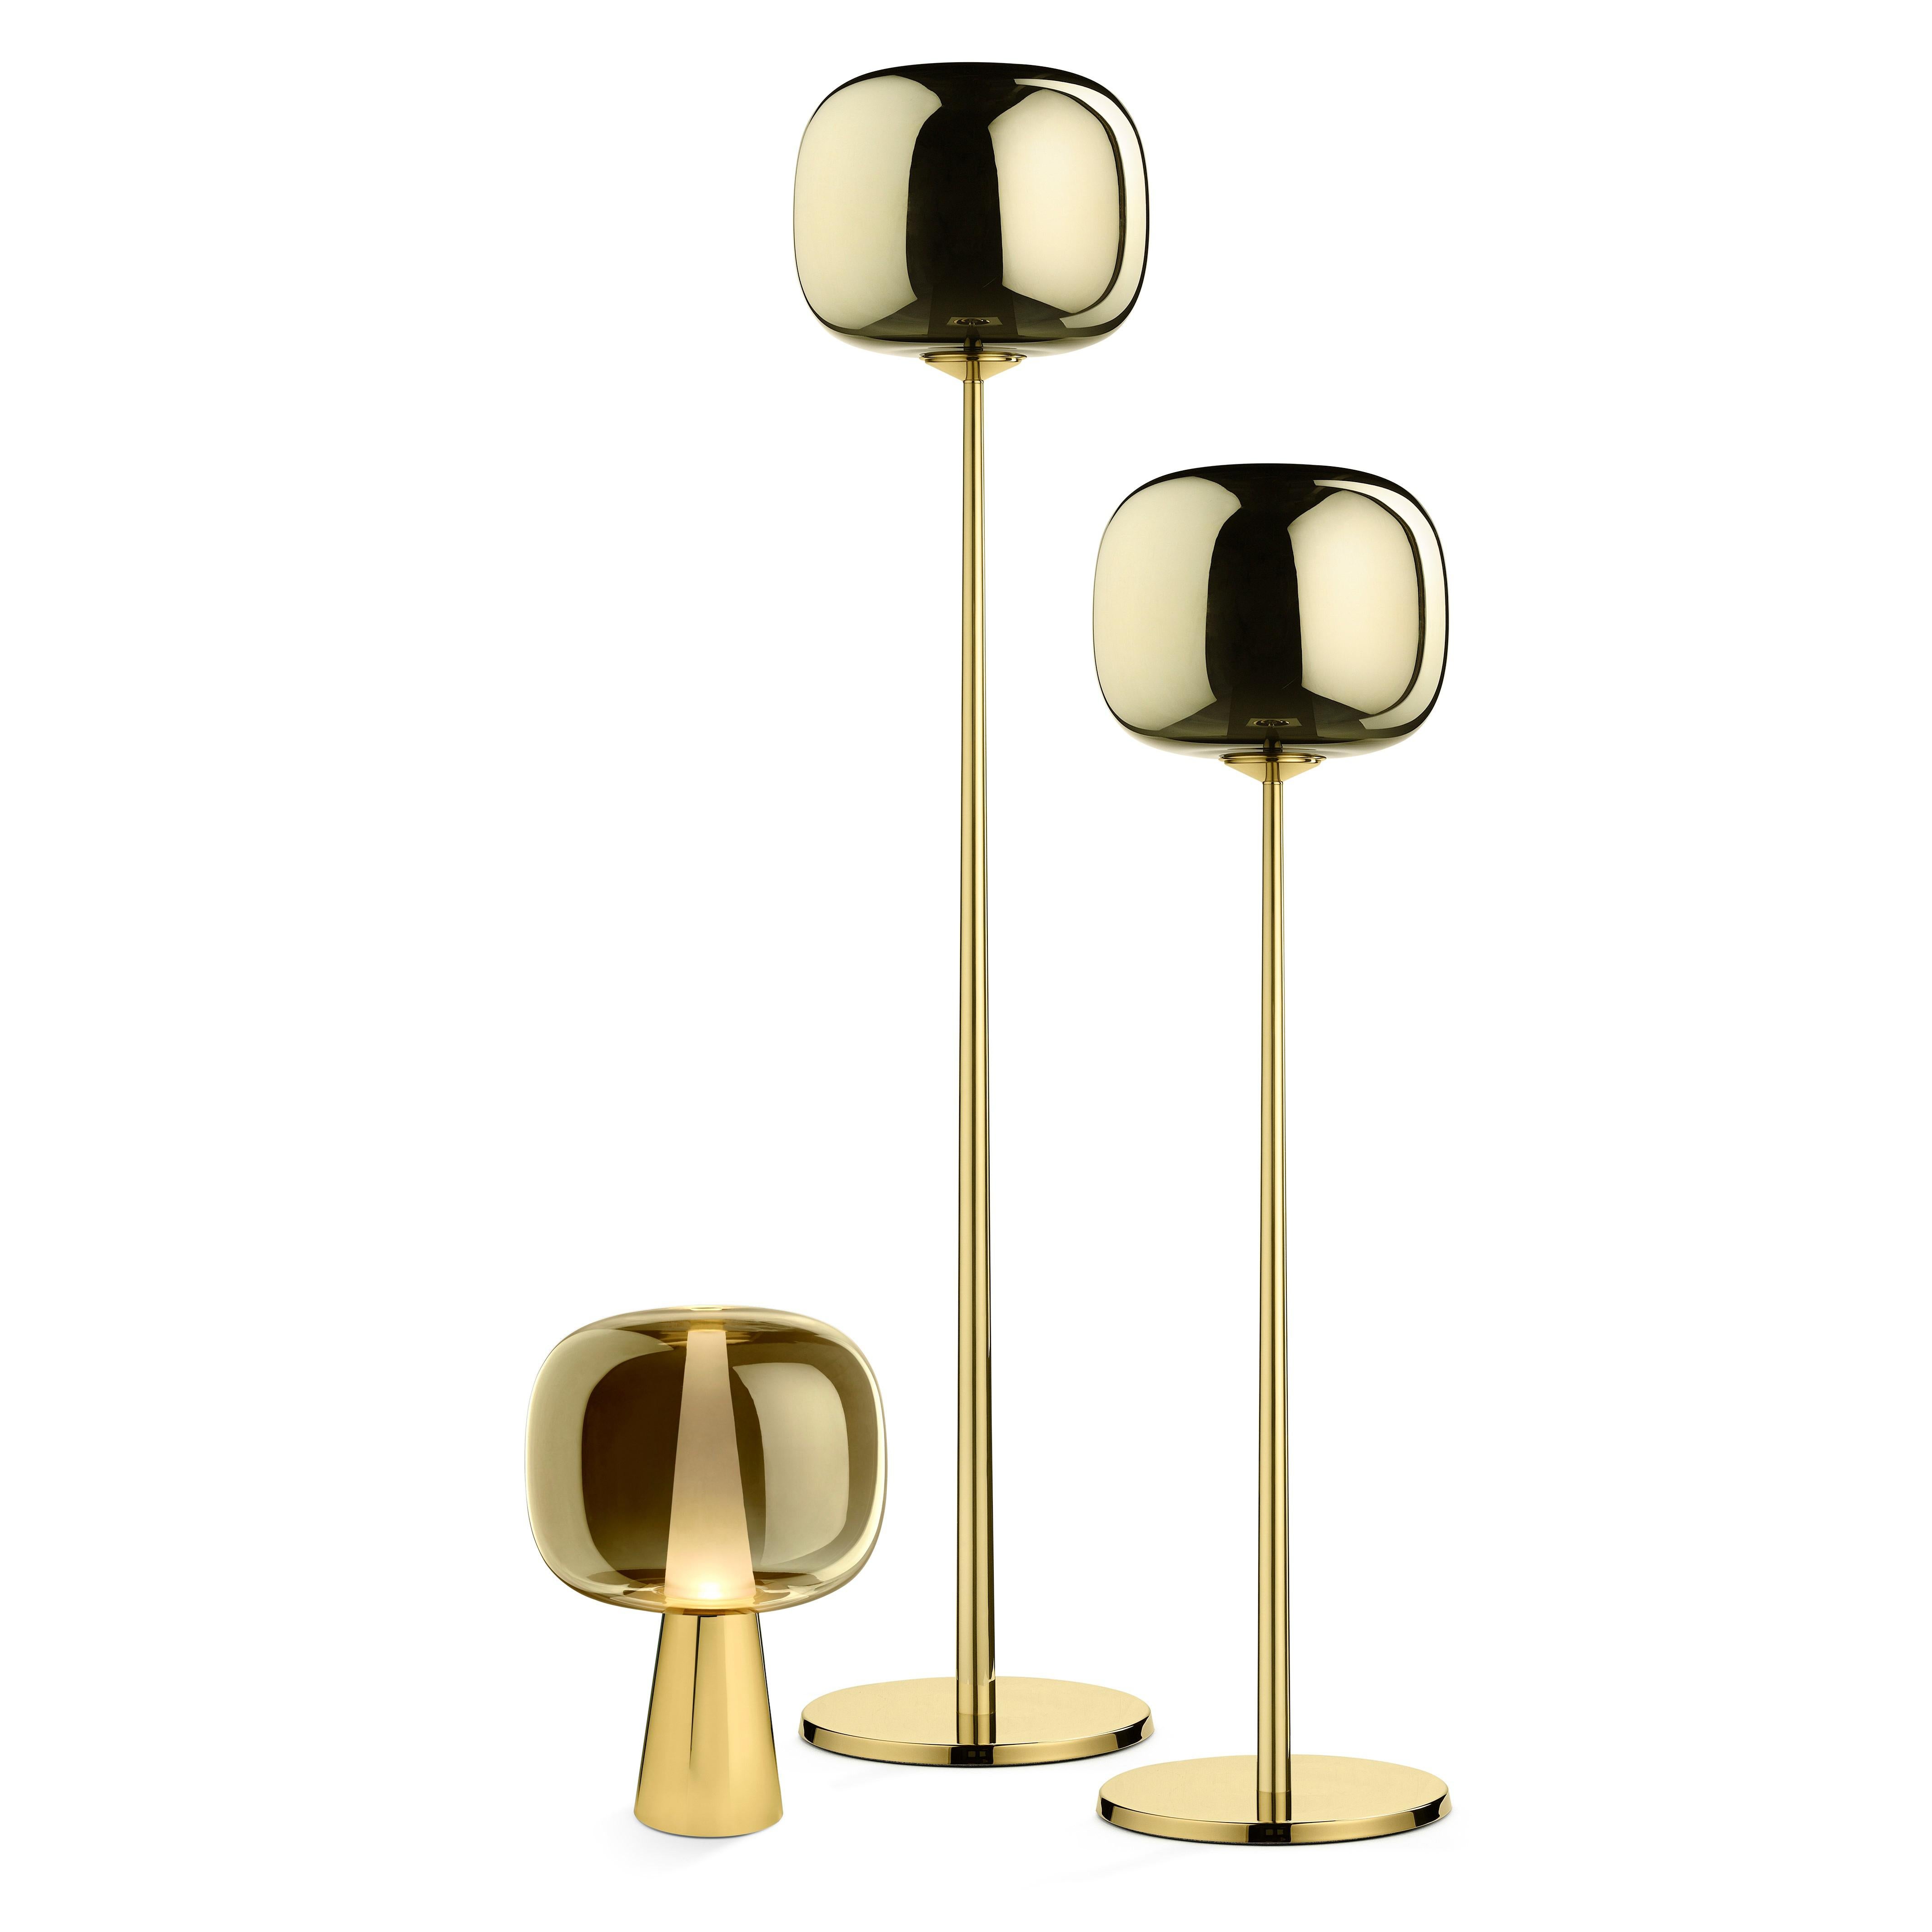 Floor lamp in brass and metalized glass. Dusk Dawn draws its name from a magical arc of time: the arrival and departure of soft light. It is the time when the sun dips below the horizon to leave an afterglow that signals the arrival of the night,